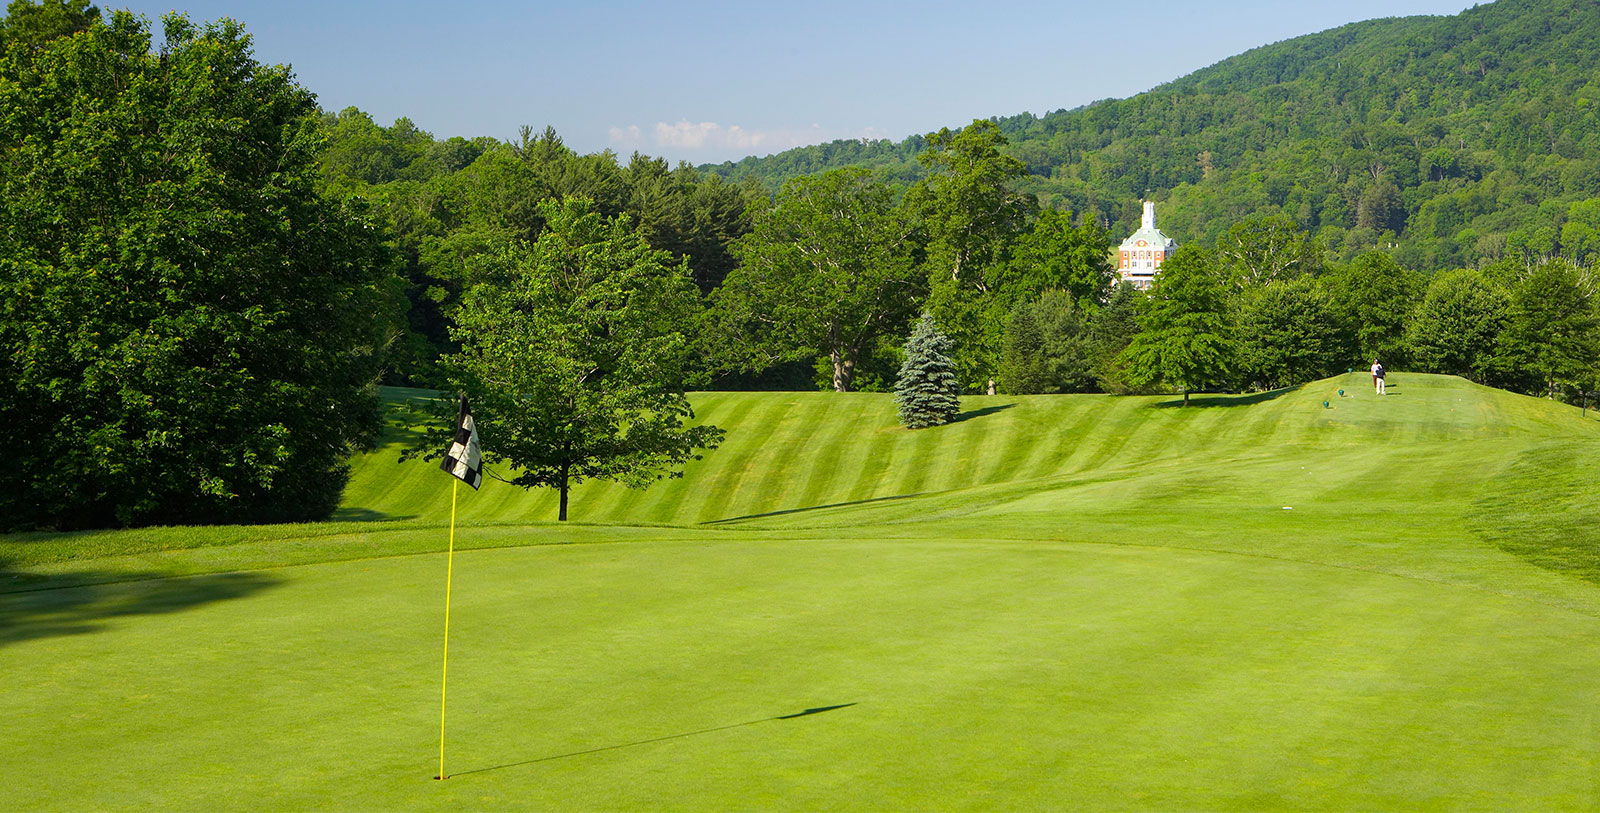 Image of Old Course, The Omni Homestead Resort, 1766, Member of Historic Hotels of America, in Hot Springs, Virginia, Golf.